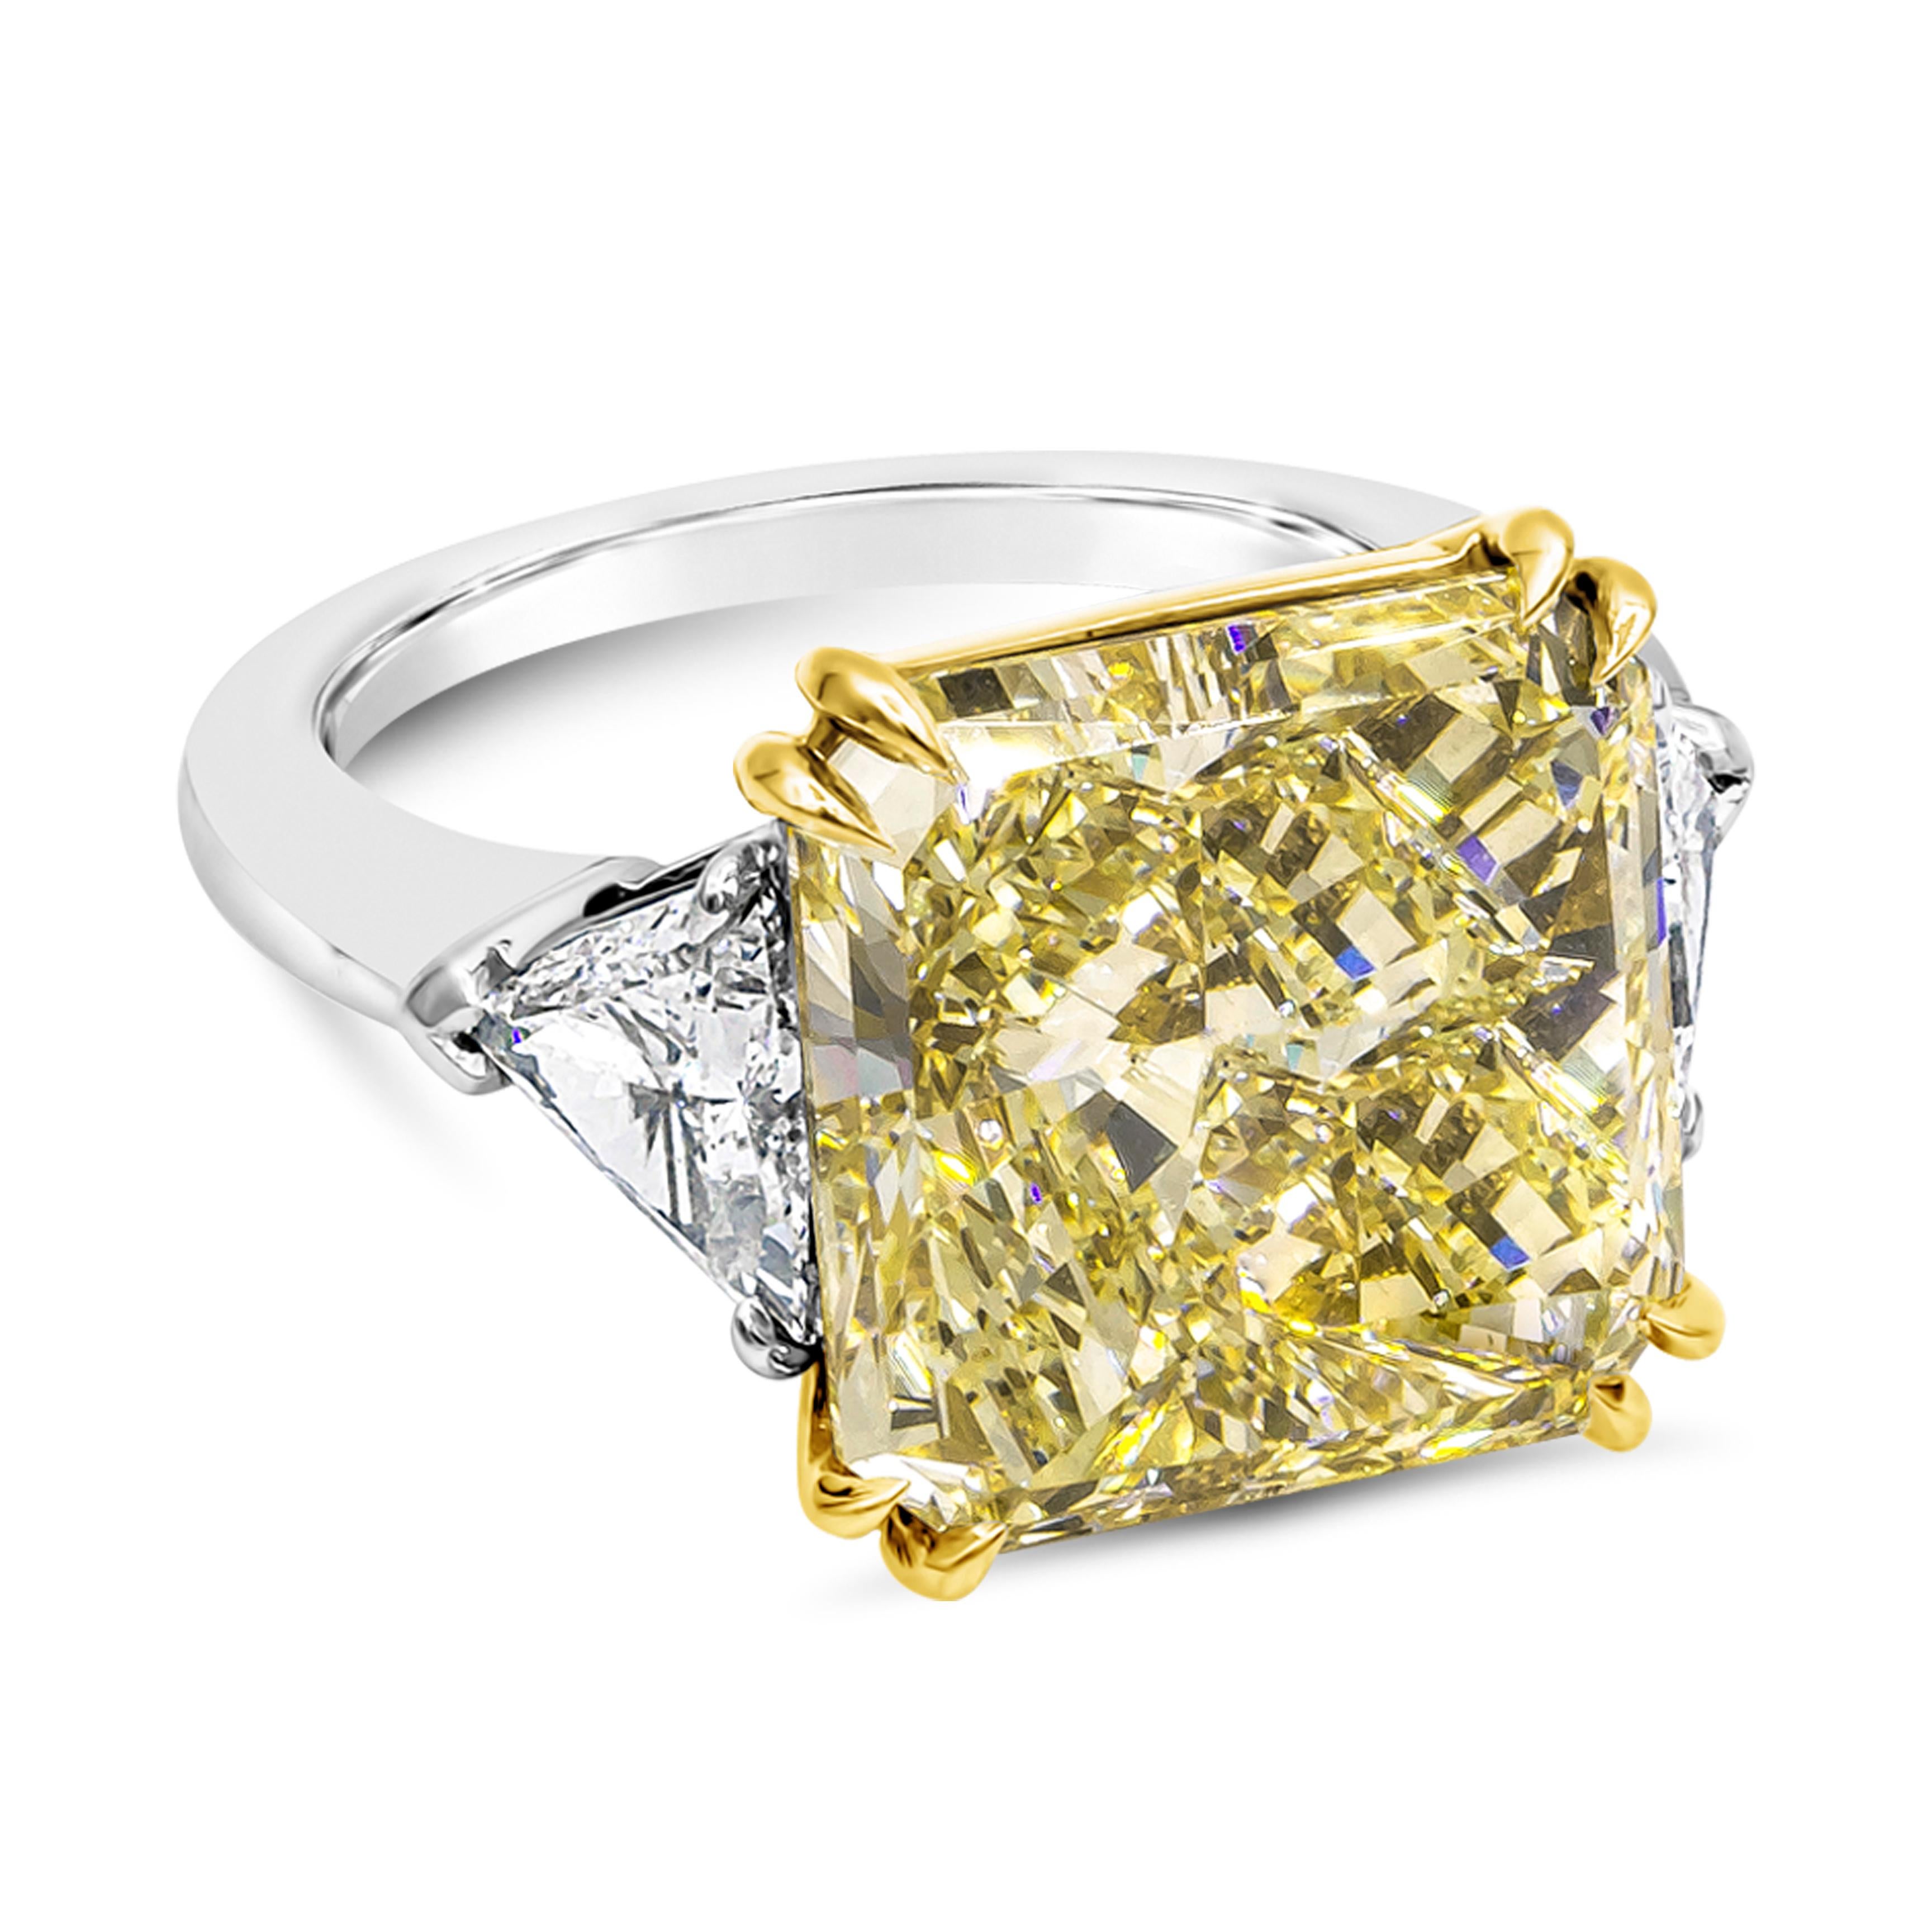 Well crafted high end engagement ring showcasing a GIA certified color-rich fancy yellow color 10.59 carat radiant cut diamond, VS1 in clarity. Accented with trillion diamonds on each side weighing 1.16 carat total and is set and finely made in